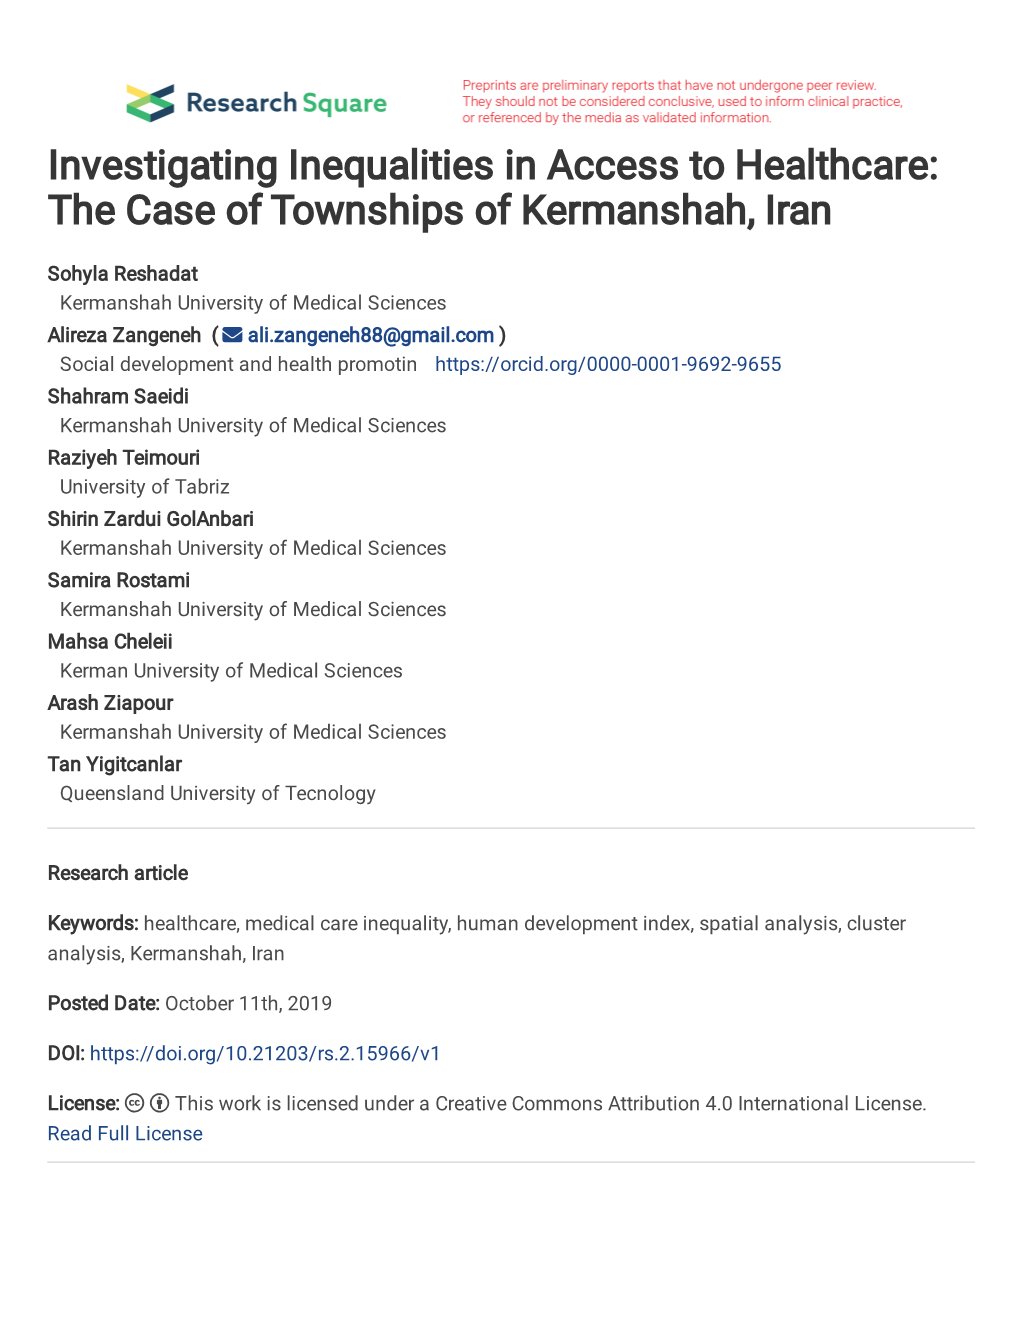 Investigating Inequalities in Access to Healthcare: the Case of Townships of Kermanshah, Iran